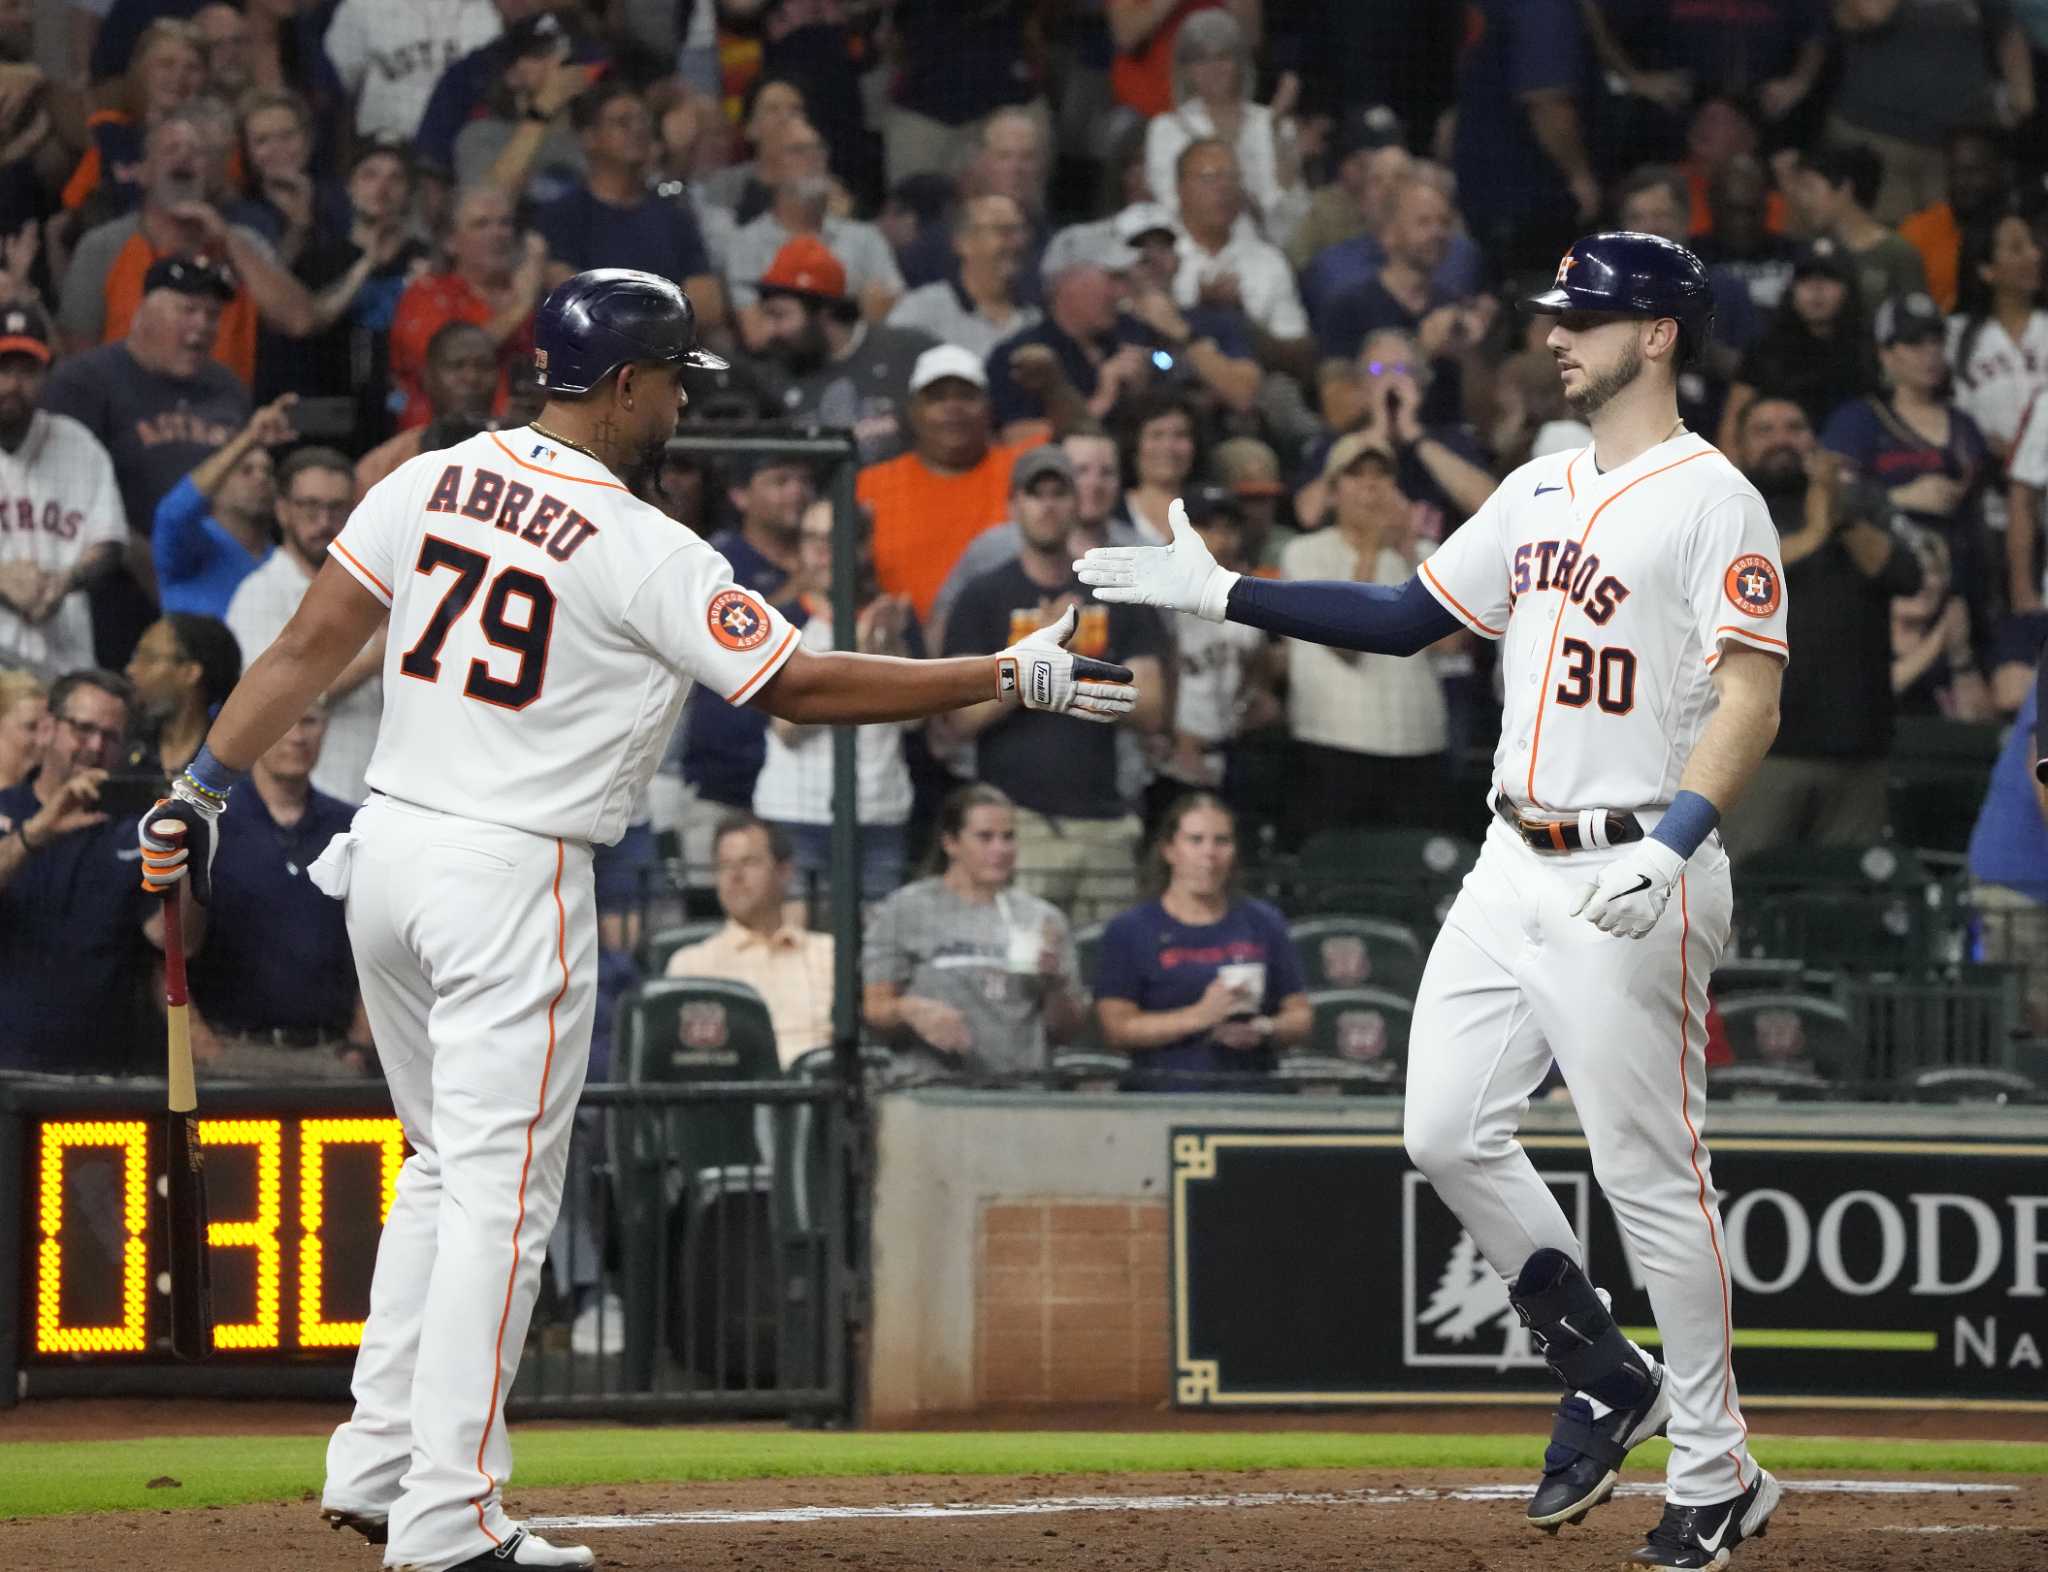 World Series 2019 Game 7 Hype, Major League Baseball, News, Scores,  Highlights, Stats, and Rumors